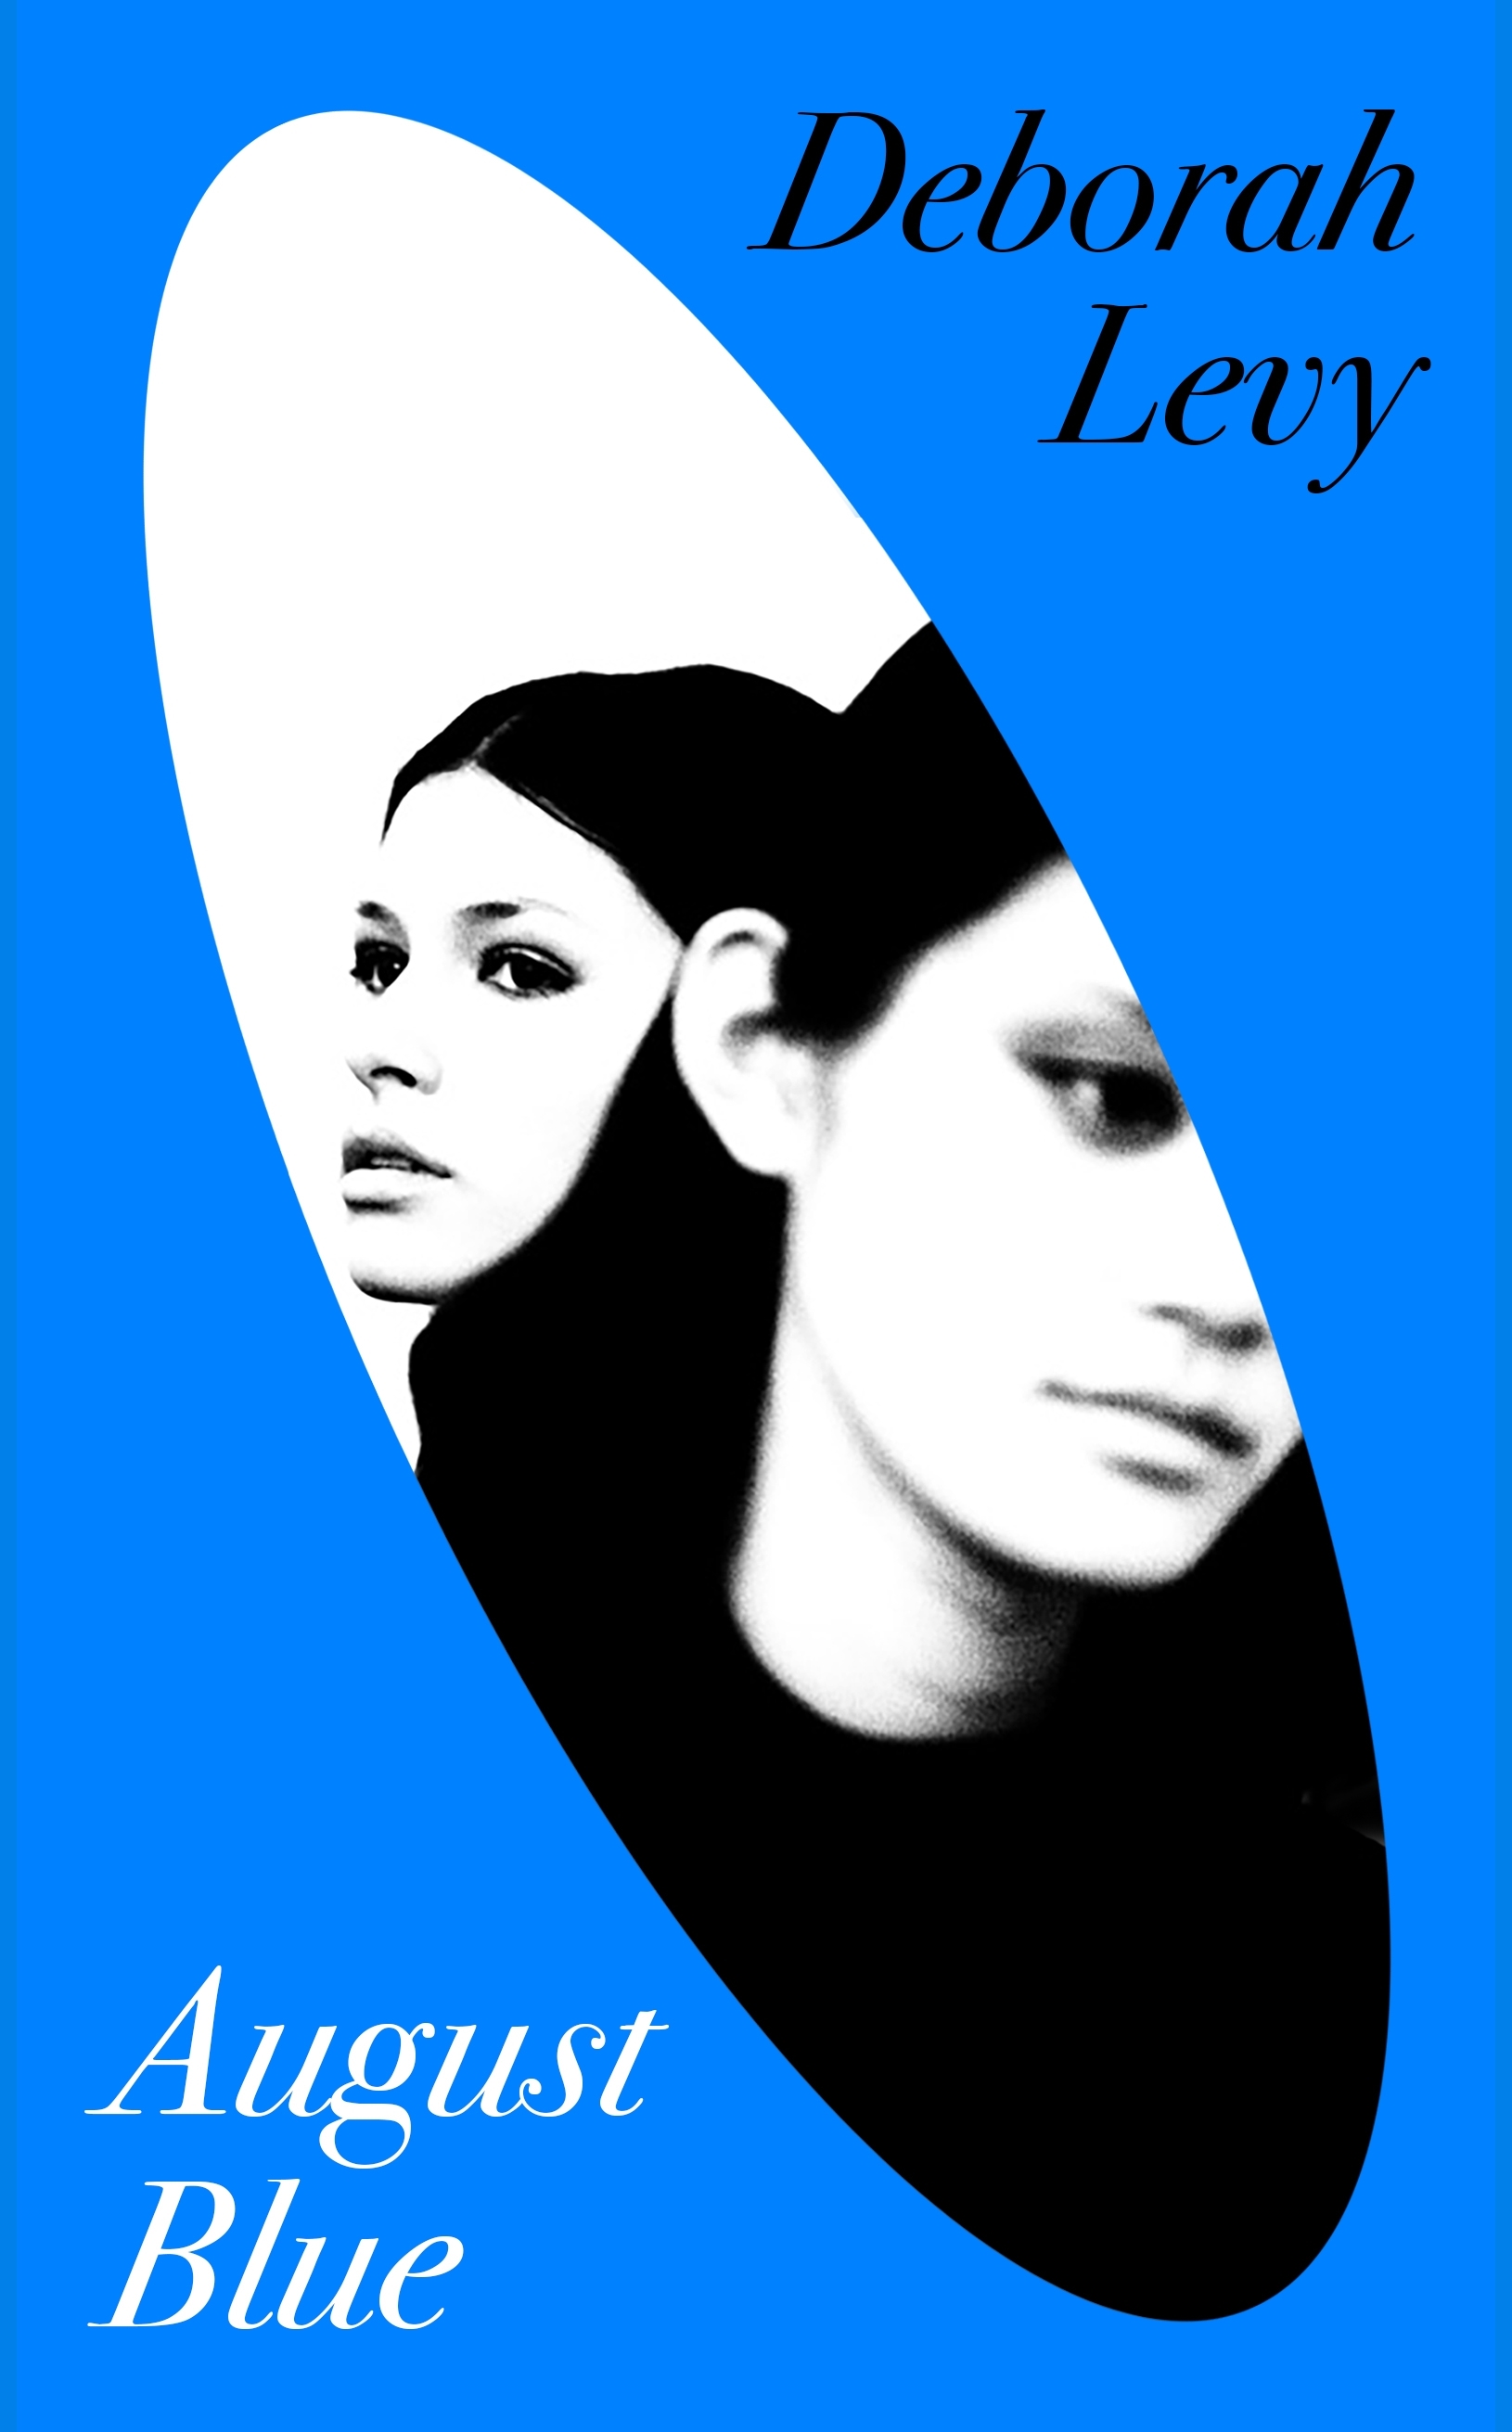 A blue book cover with an oval cut-out showing a black and white image of two young women's faces in profile